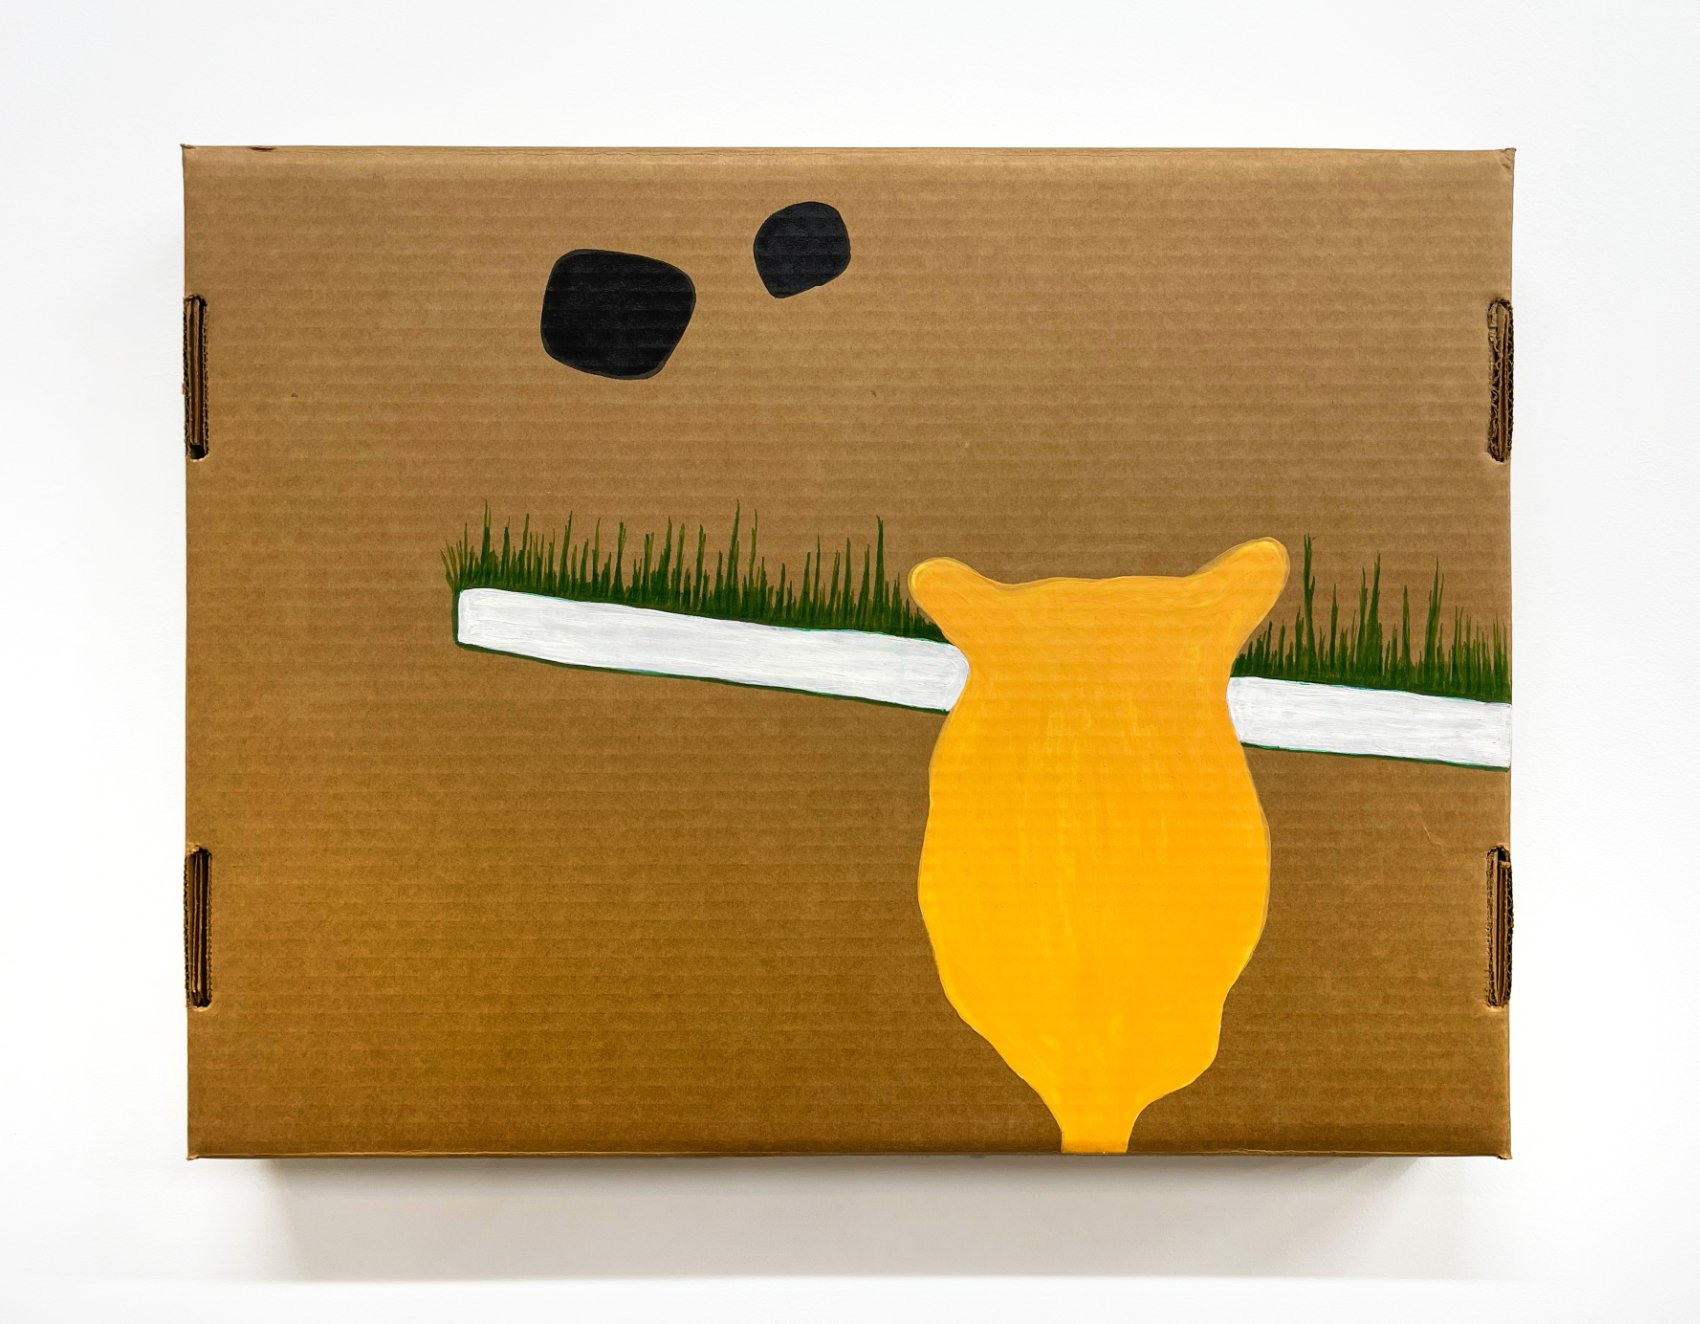  Printout (a nocturne), set 3 14 1/4 x 18 1/4 x 2 inches, Paint, ink, pen on cardboard, 2005 